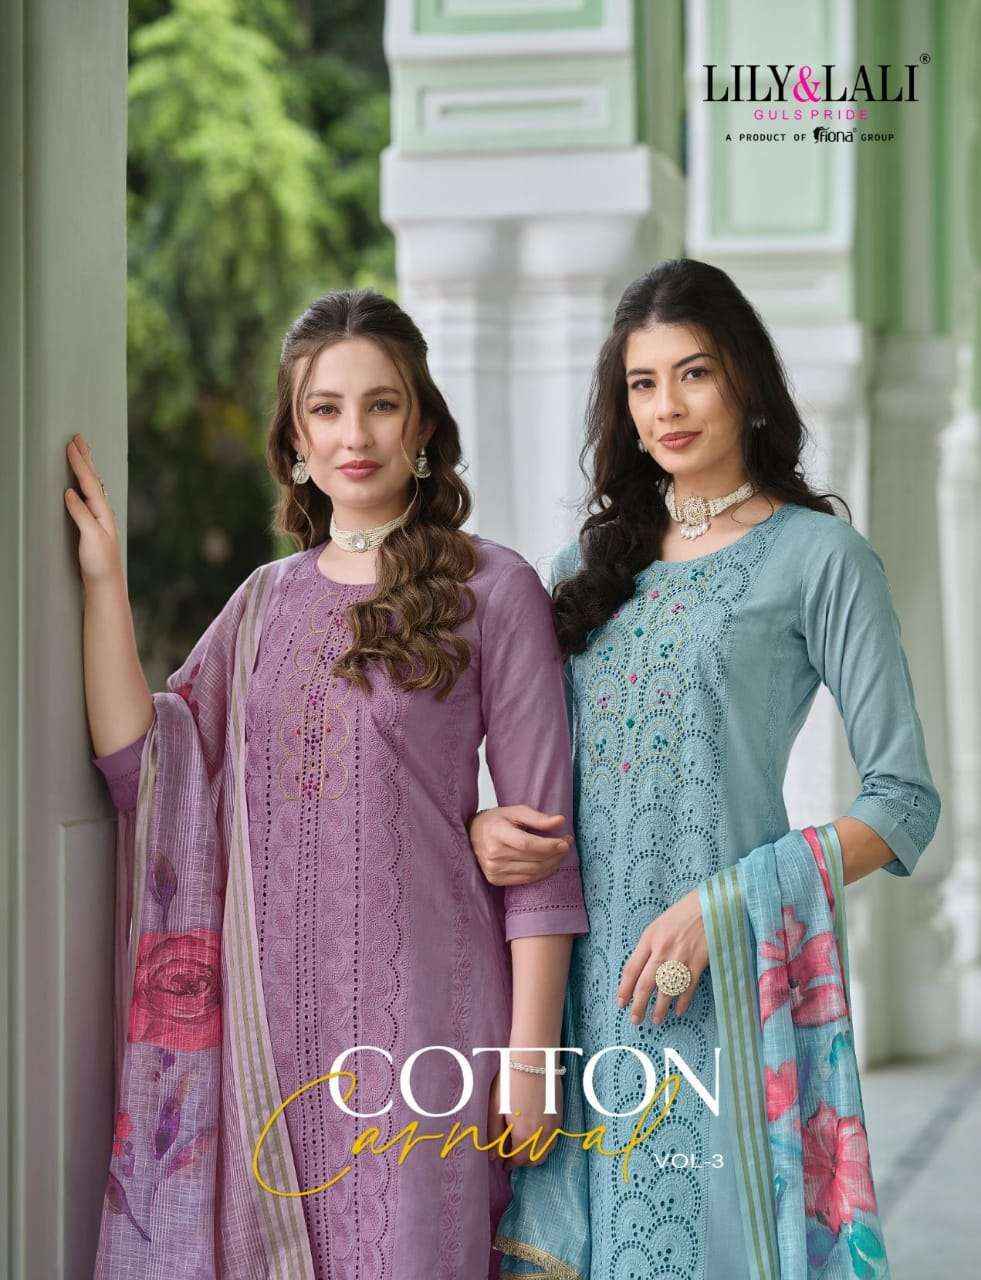 LILY AND LALI COTTON CARNIVAL VOL 3 DESIGNER READYMADE SUITS ( 6 PCS CATALOG )